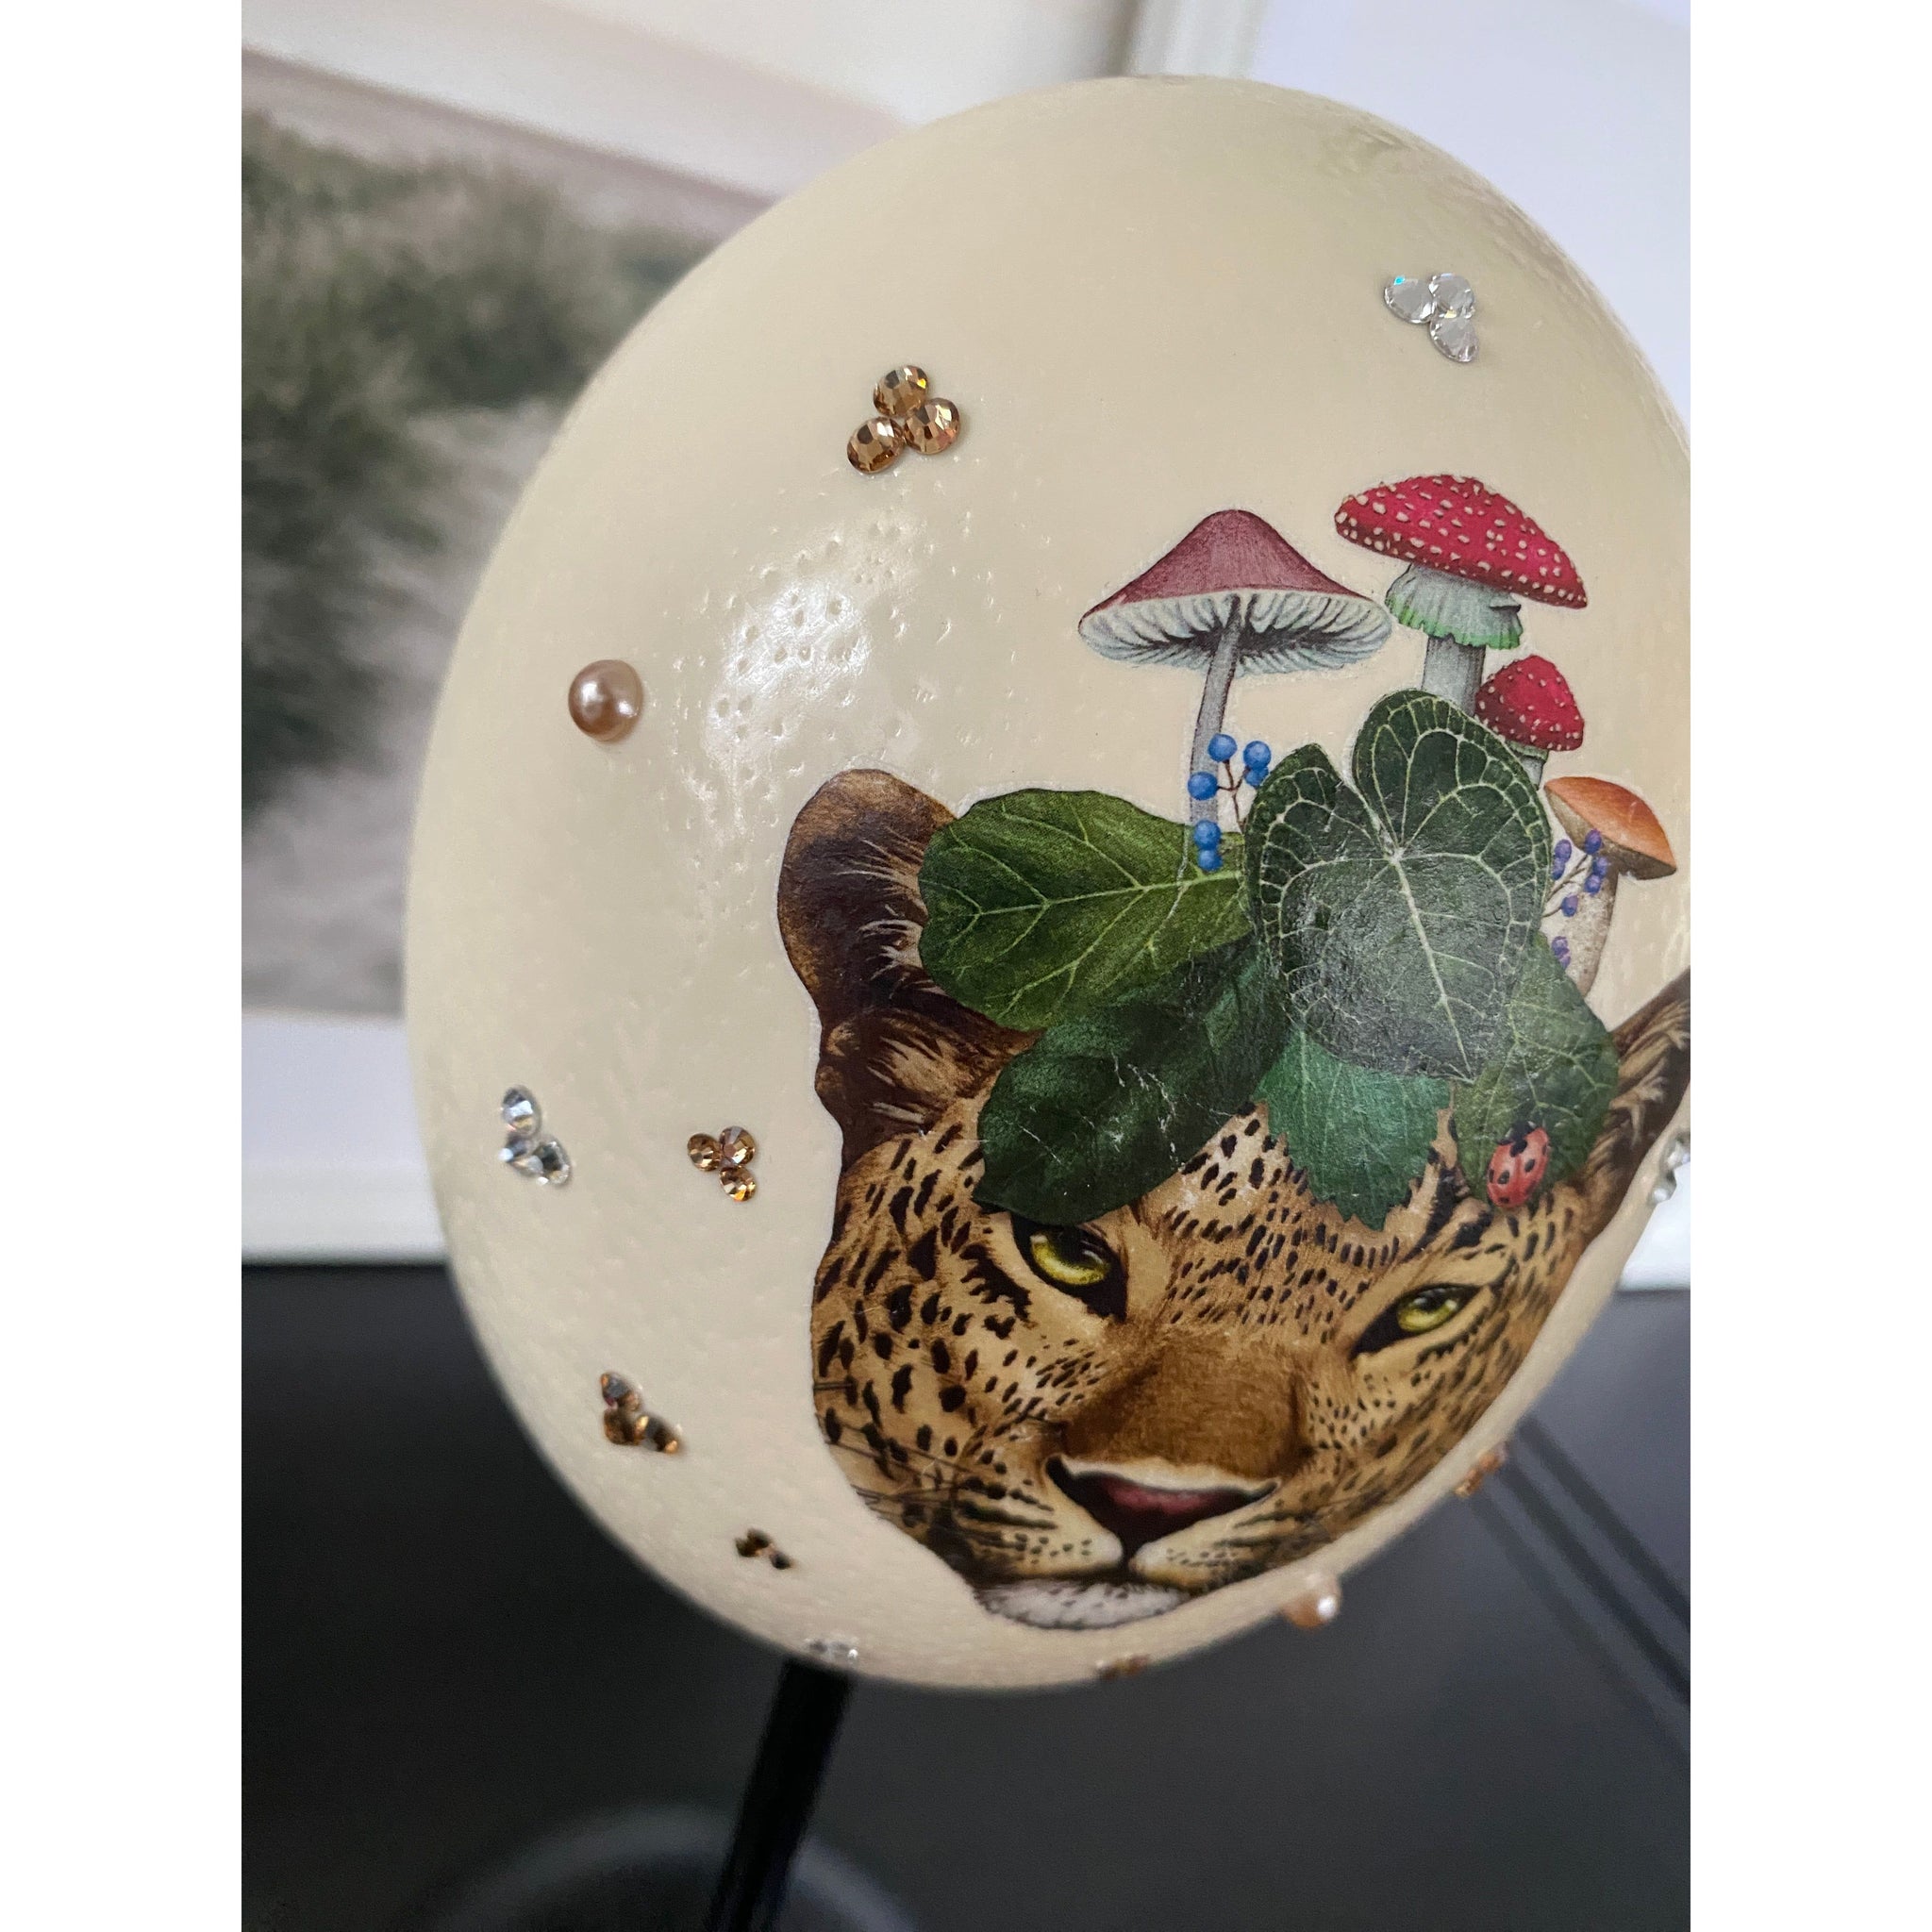 Ostrich egg lamp, leopard with mushroom hat